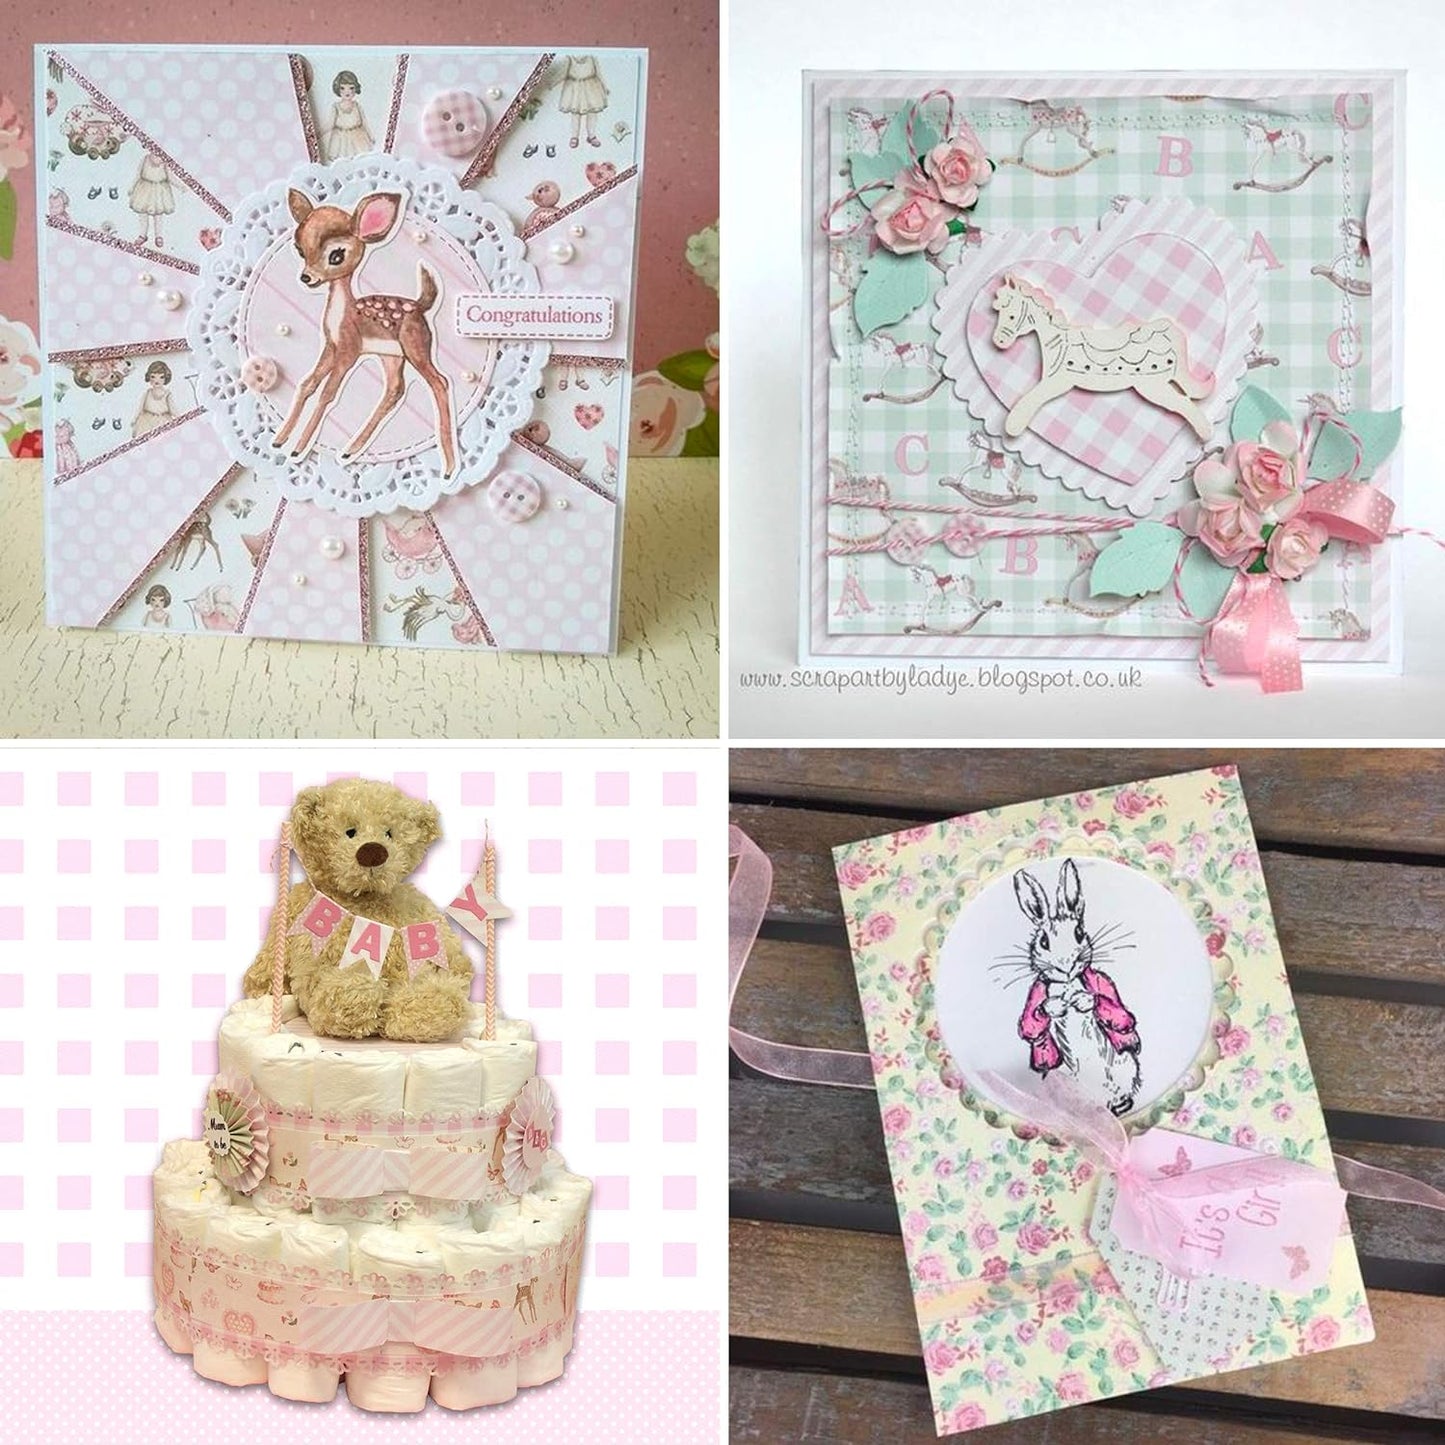 First Edition Pad Premium 12x12" It's a Girl